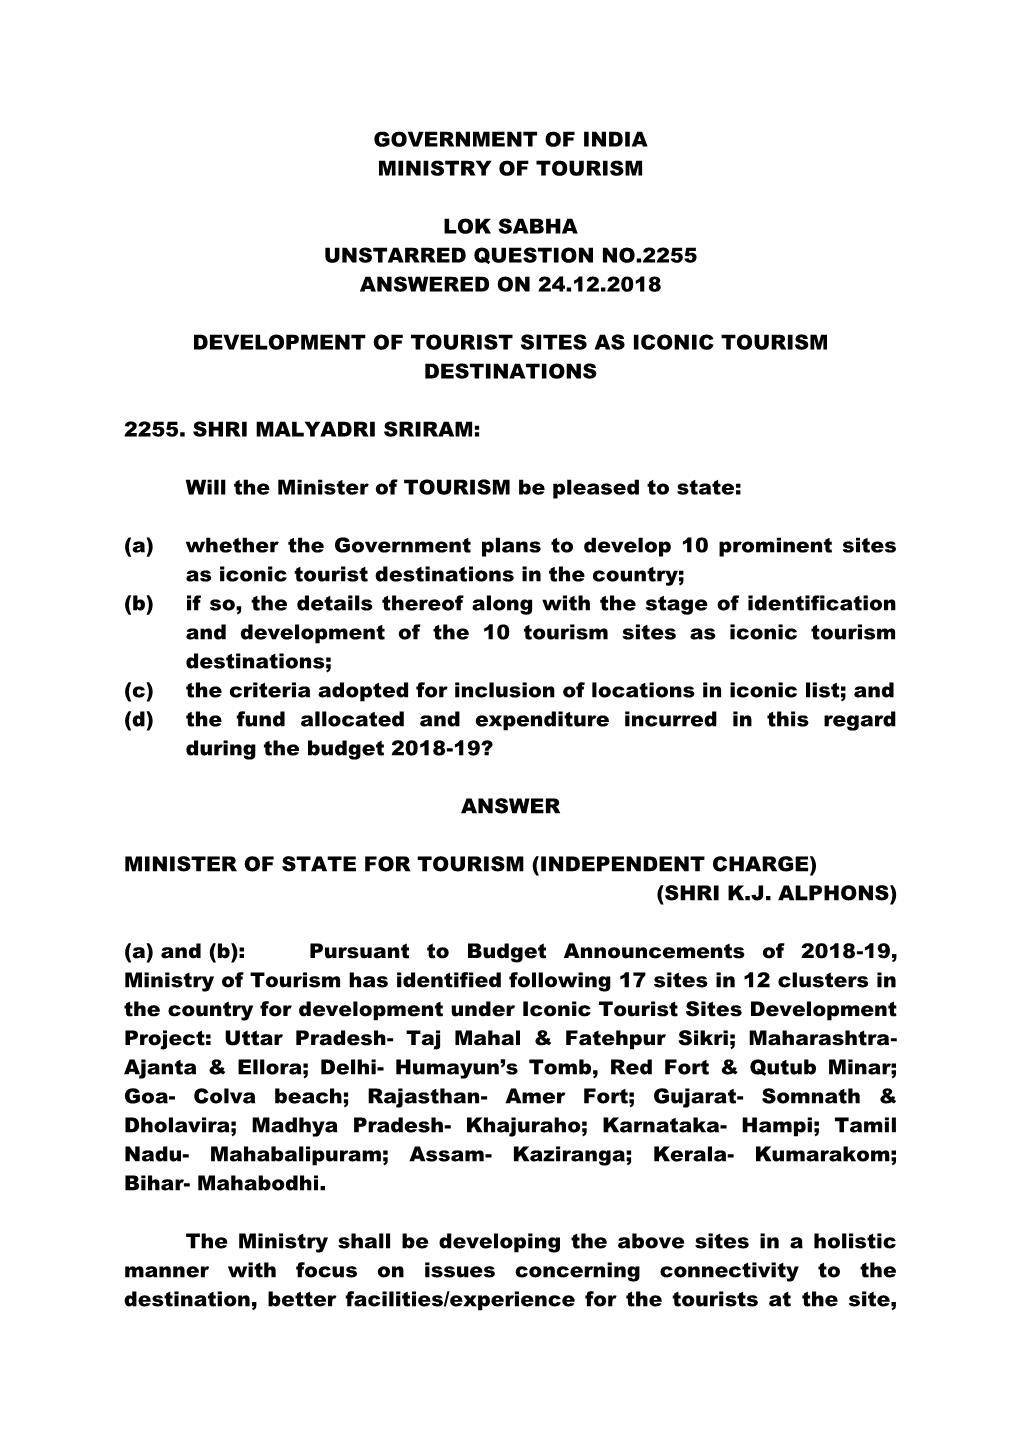 Government of India Ministry of Tourism Lok Sabha Unstarred Question No.2255 Answered on 24.12.2018 Development of Tourist Sites